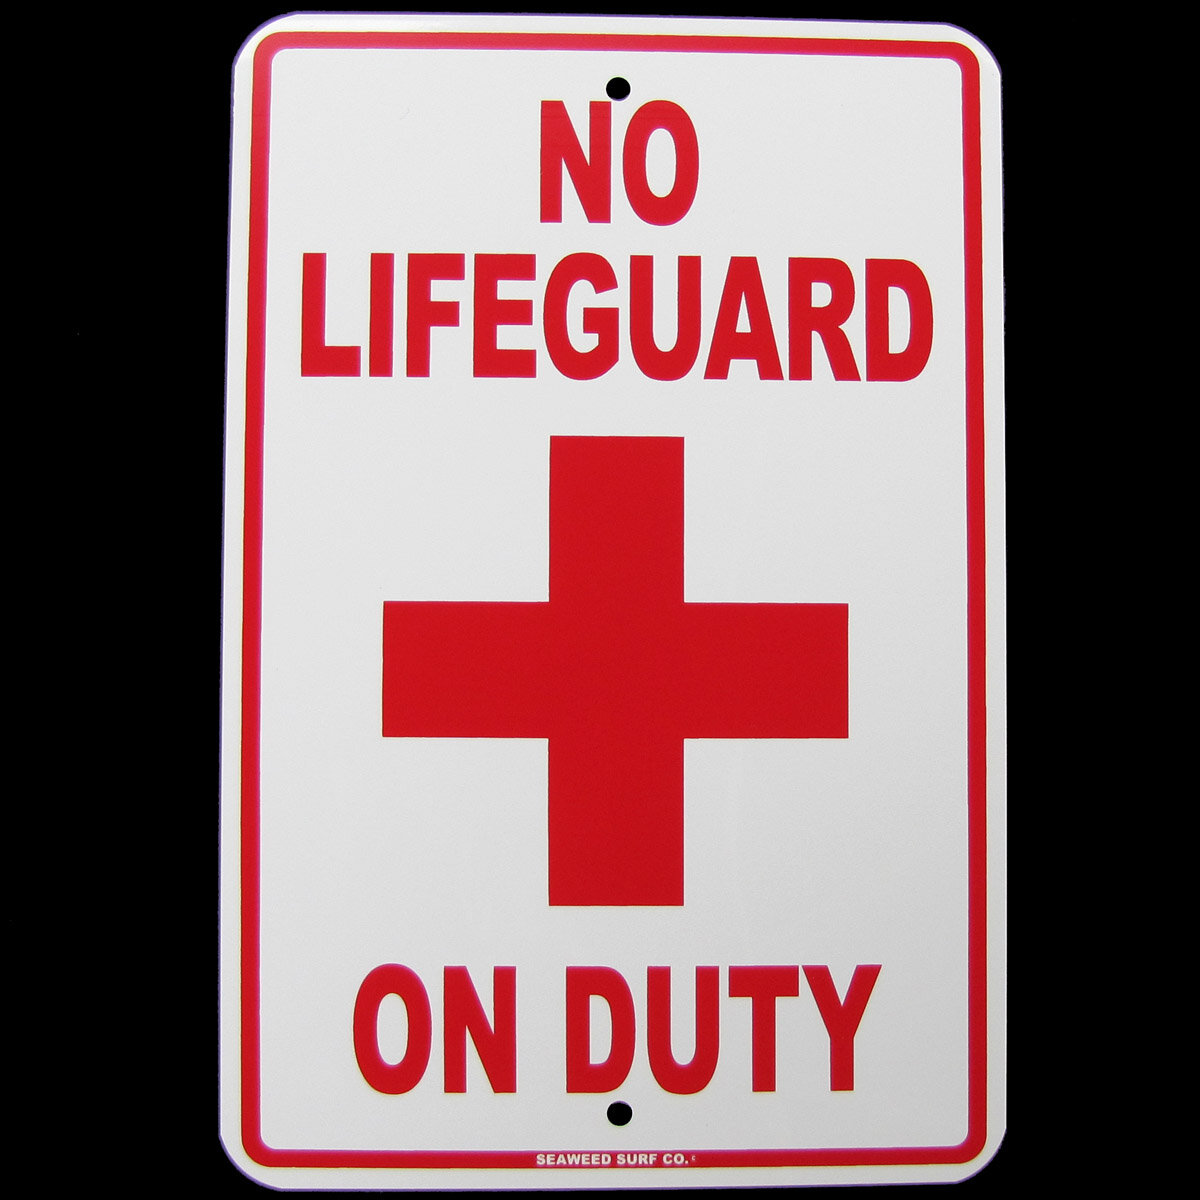 Lifeguard Dude Lives Here Sign Wall Plaque Vintage Style Metal Sign Wall Plaque